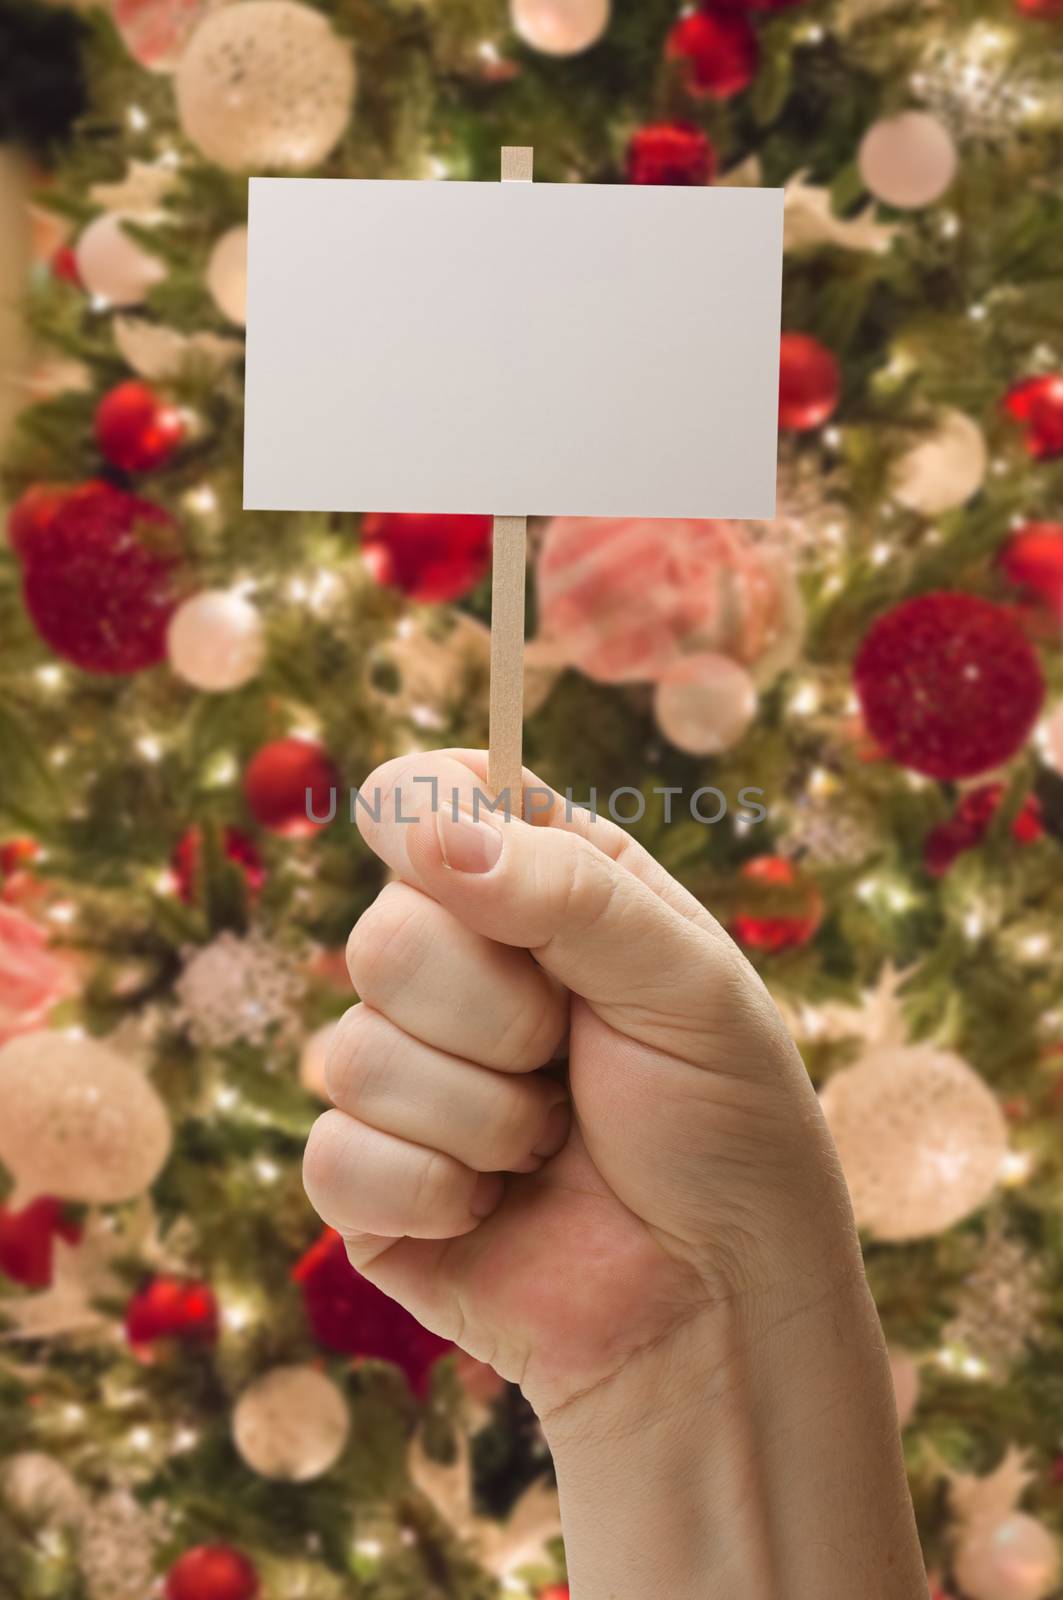 Hand Holding Blank Card In Front of Decorated Christmas Tree.